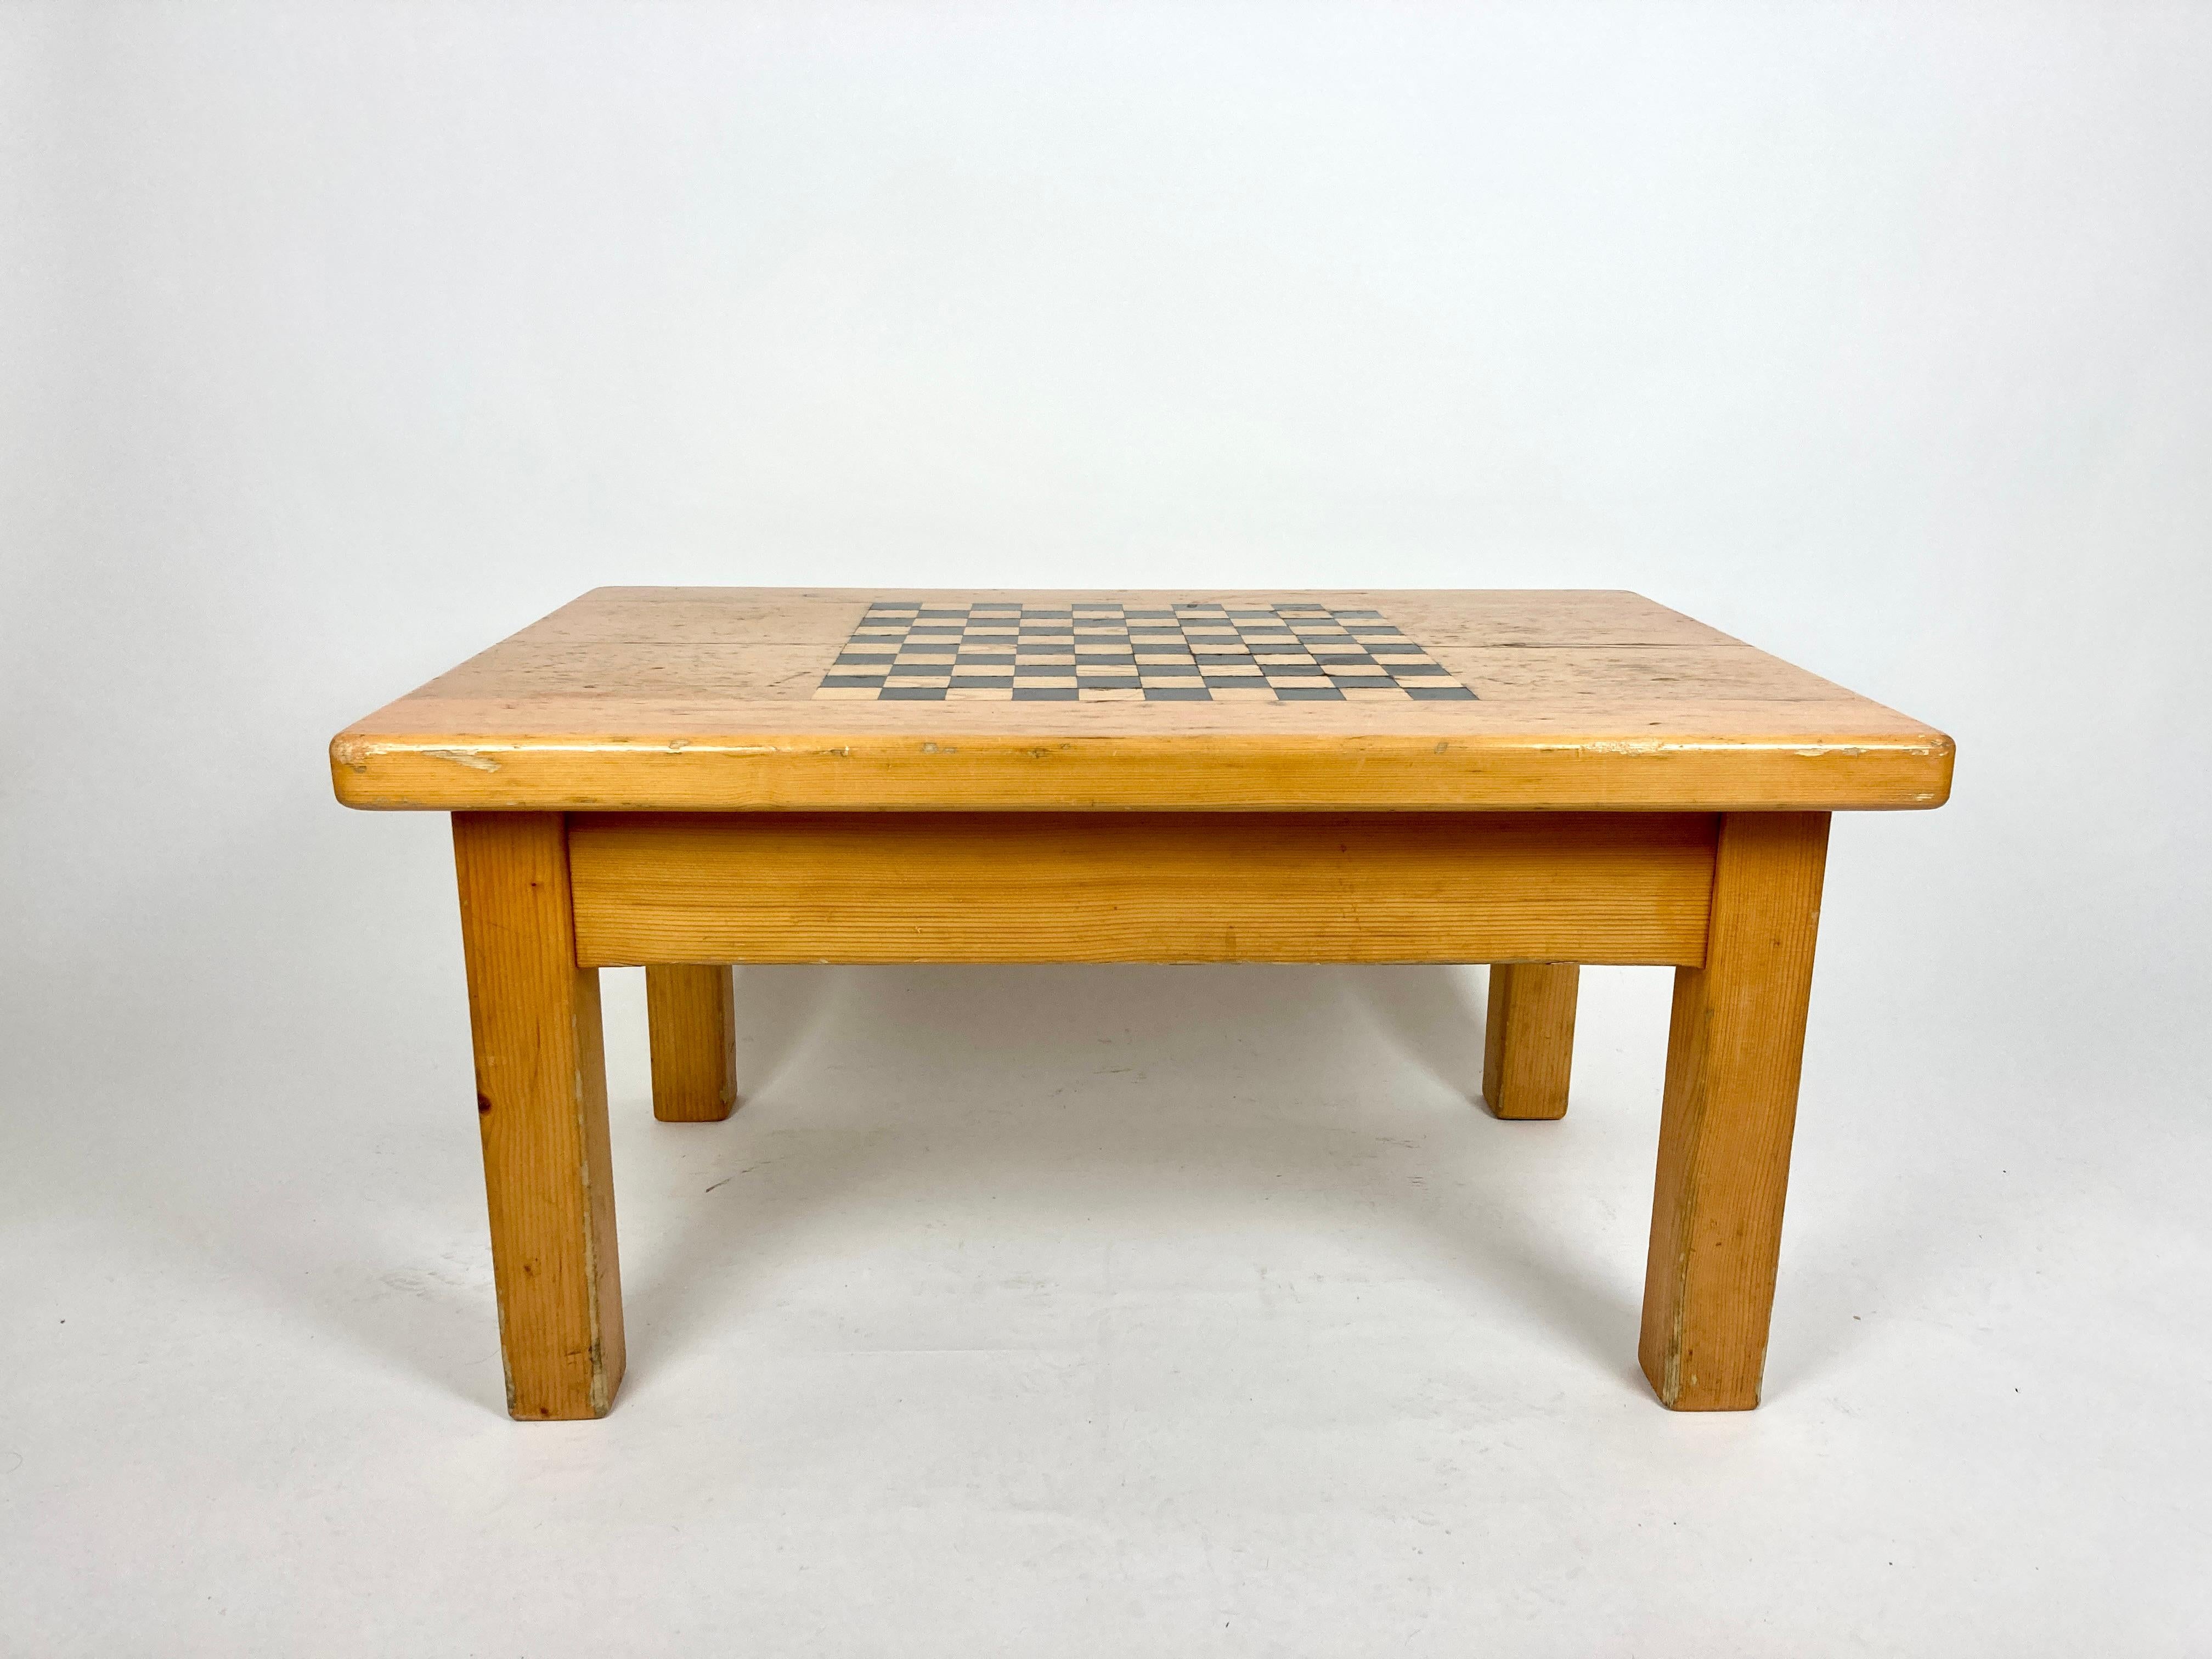 Vintage French alpine chalet coffee table with inlaid chequer board sourced from a chalet clearance in Meribel, France. 

Made of chunky pine, with inlaid chequer / chess board design. 

The table most likely dates from the late 20th